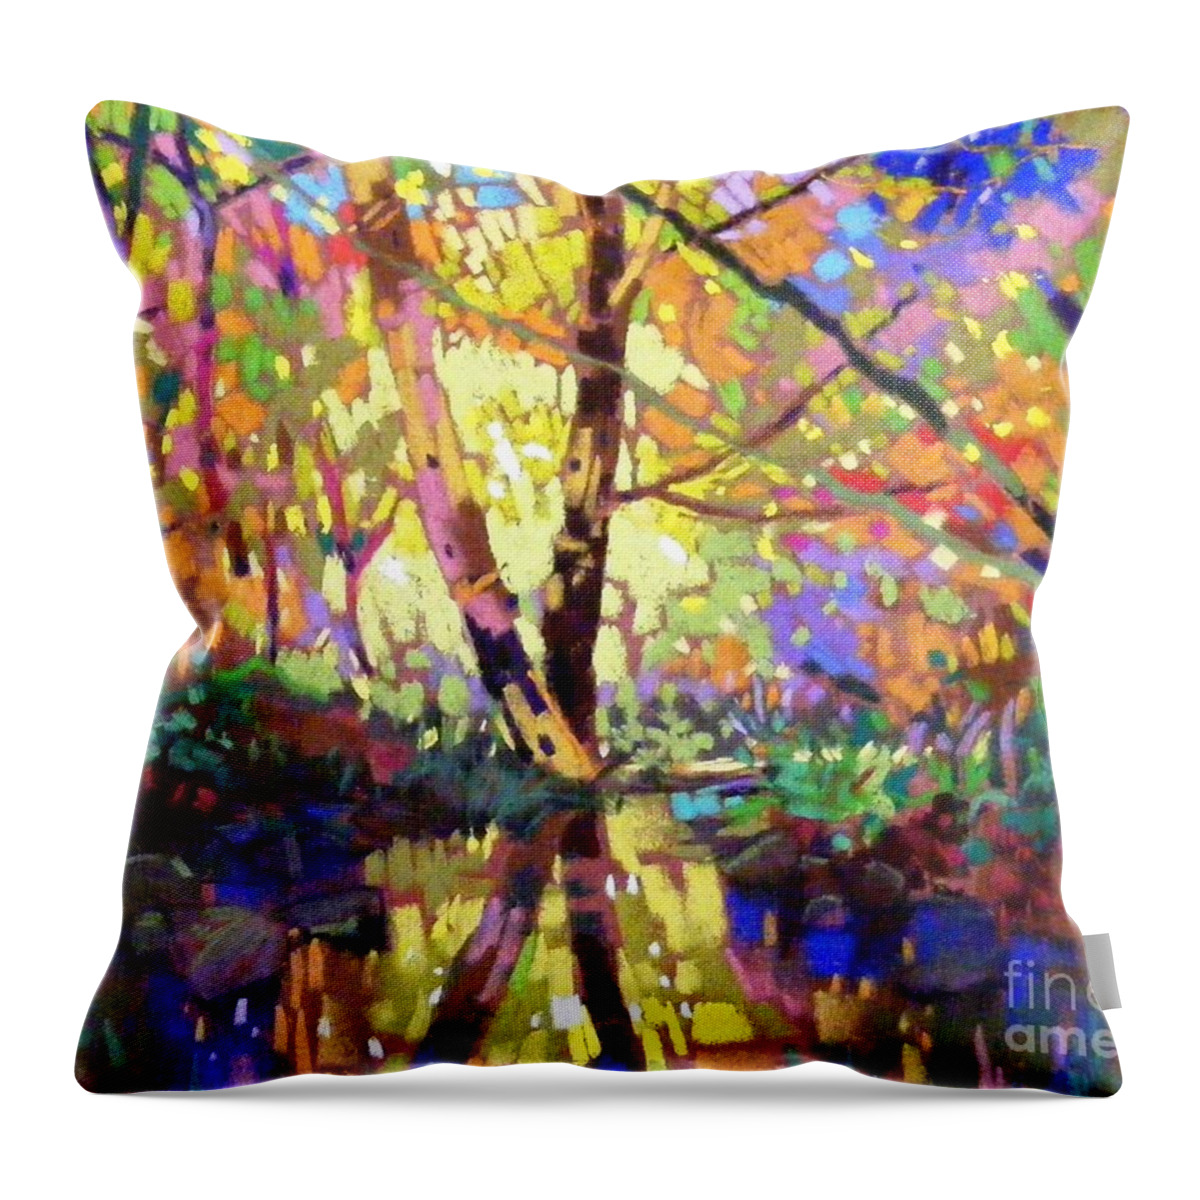 Water Reflection Throw Pillow featuring the painting Calm reflection by Celine K Yong